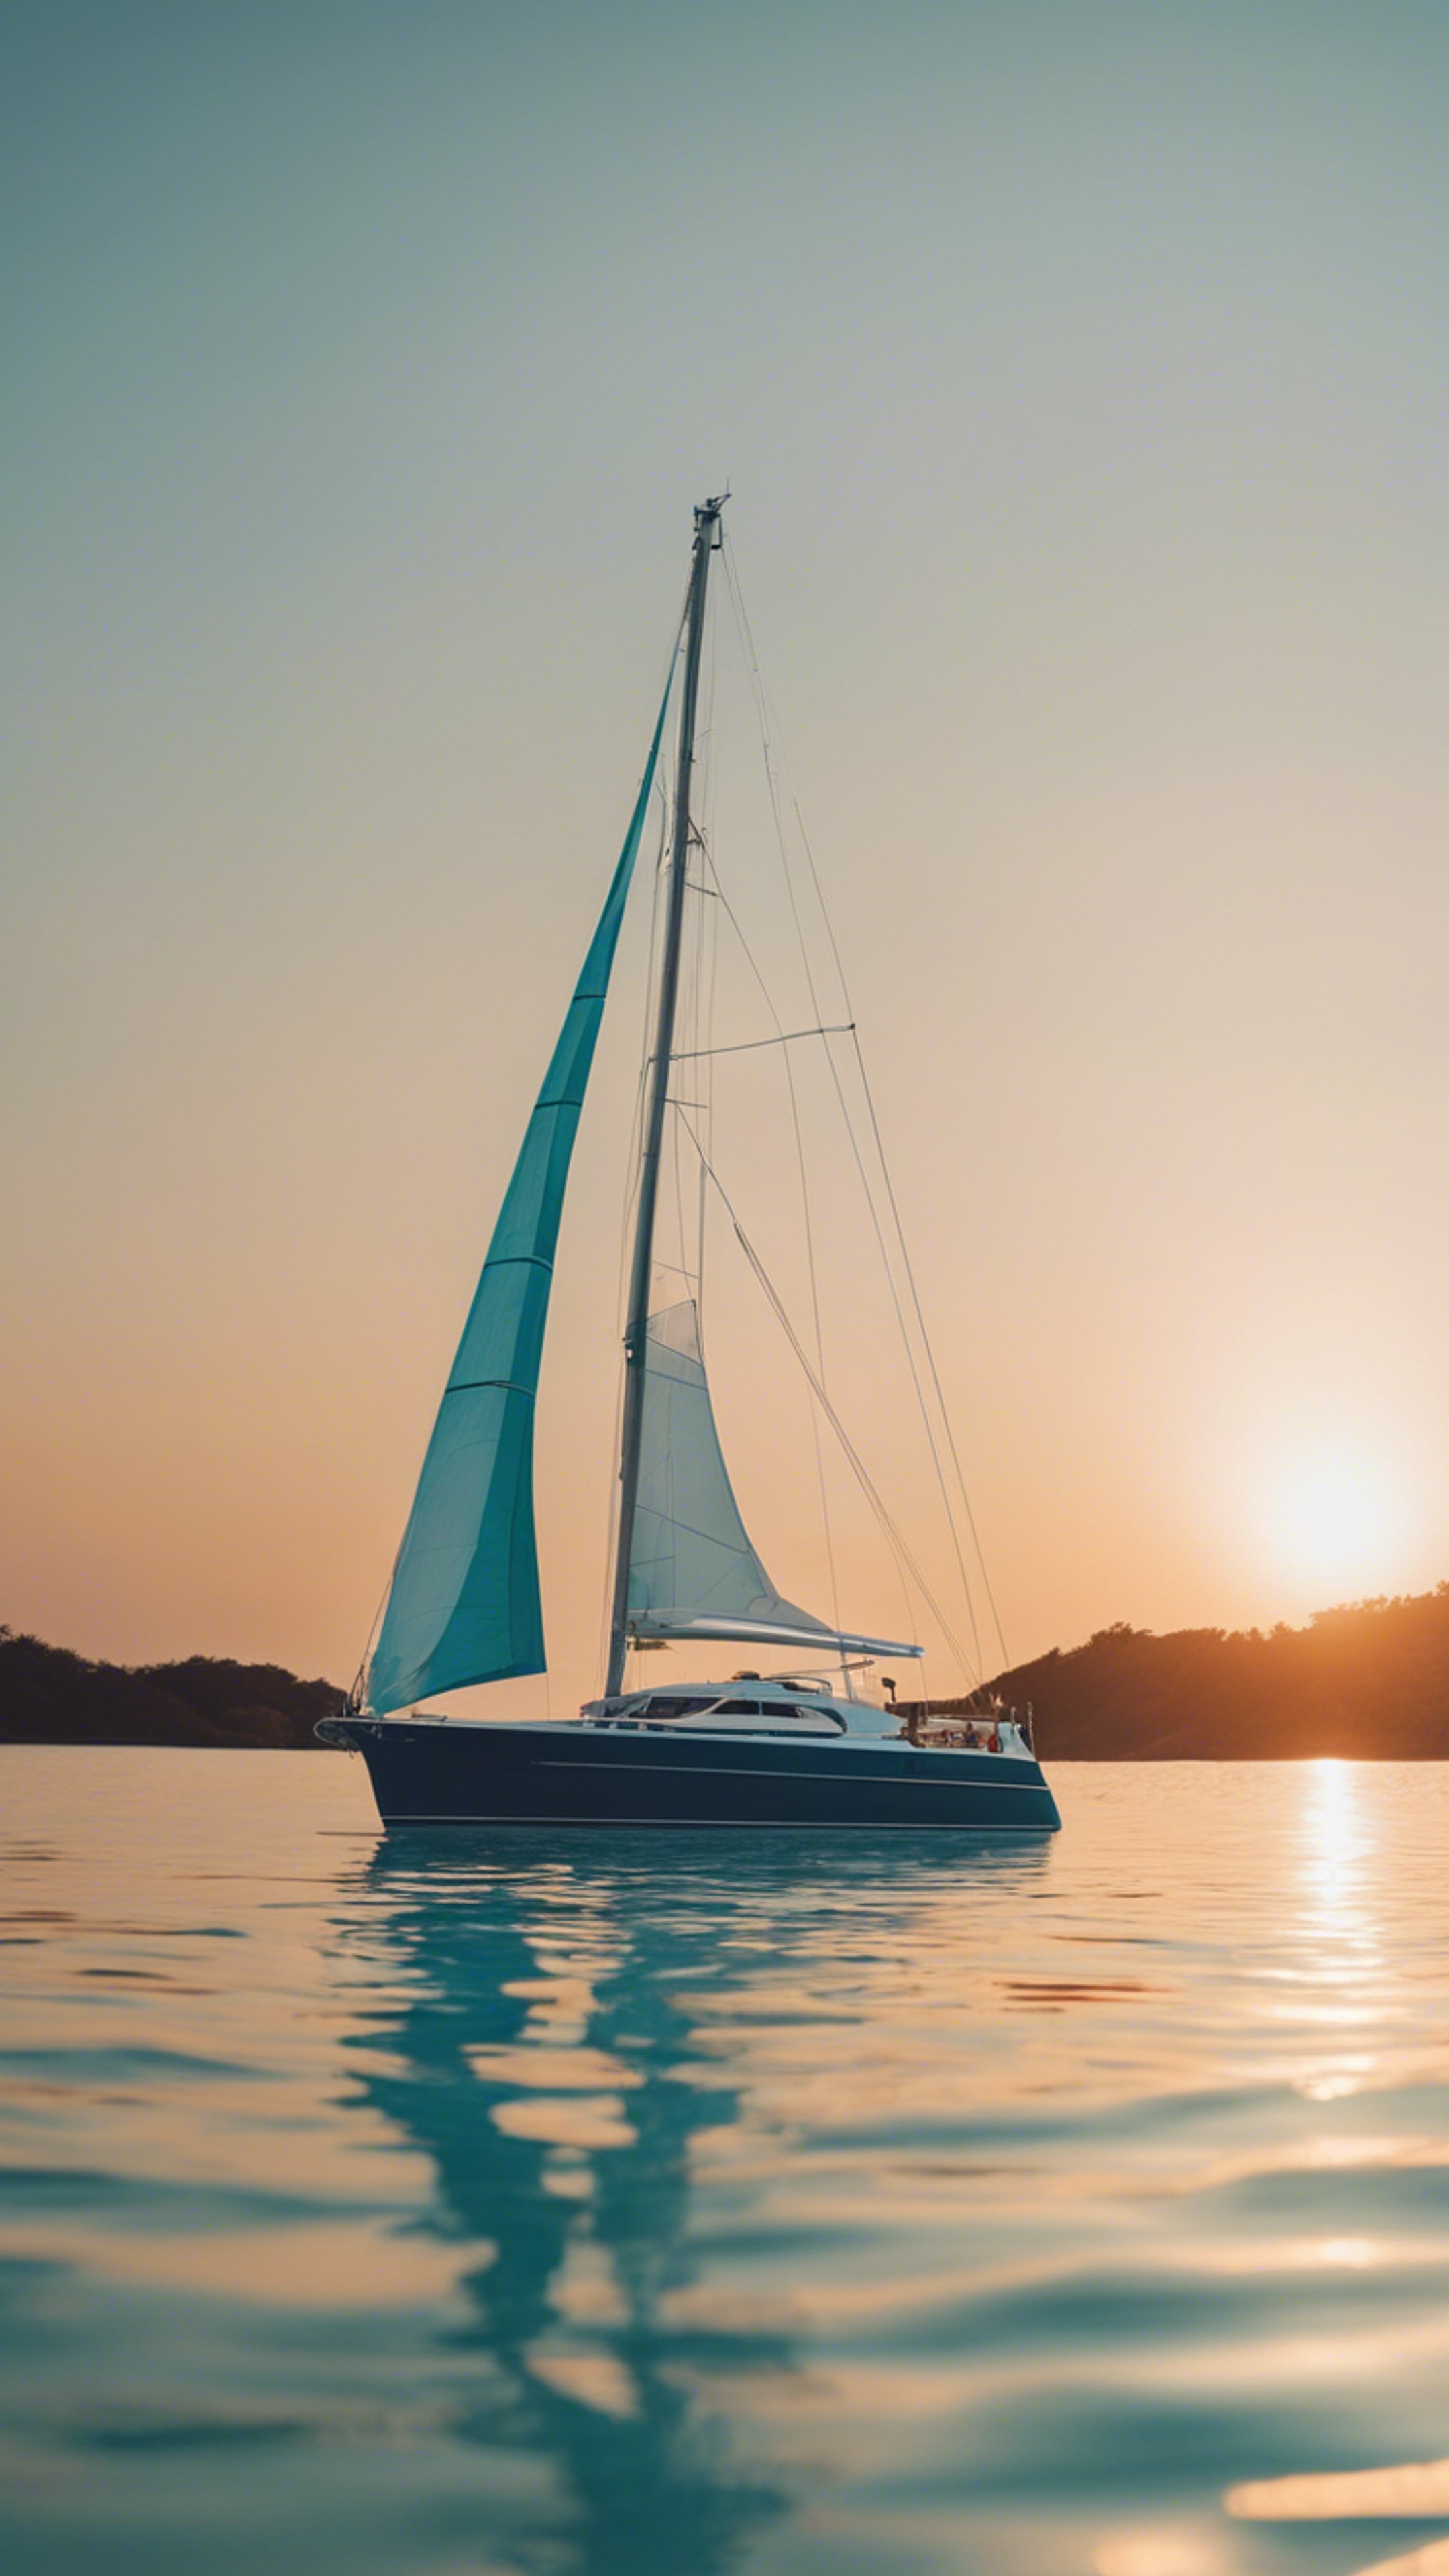 A preppy blue yacht sailing calmly on clear aquamarine waters at sunset. Hintergrund[1bfcce9f38c64176b950]